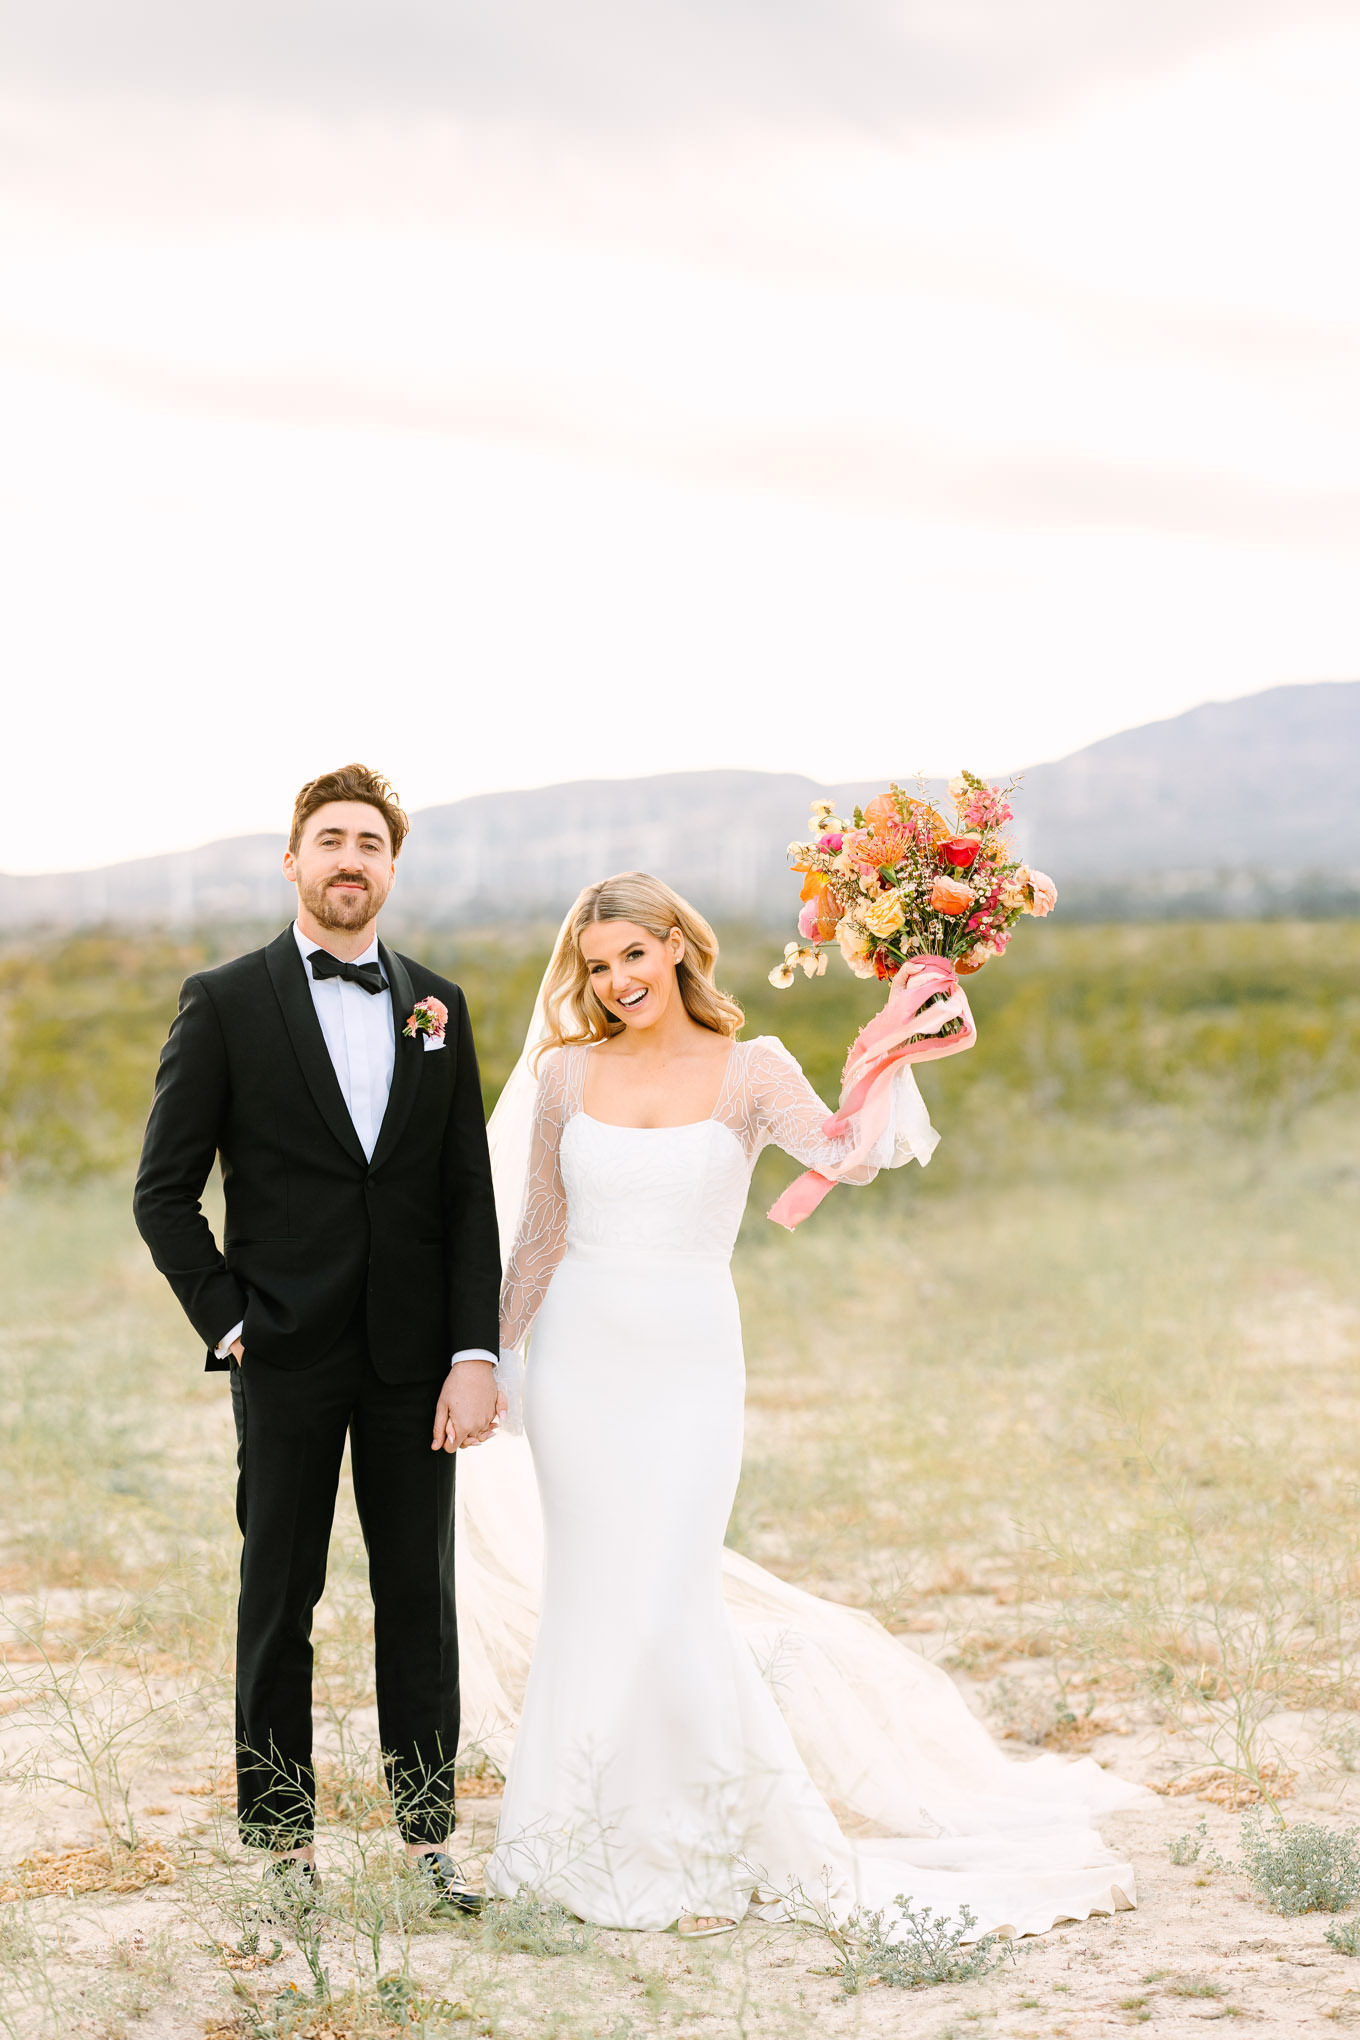 Lautner Compound Wedding | Wedding and elopement photography roundup | Los Angeles and Palm Springs photographer | #losangeleswedding #palmspringswedding #elopementphotographer Source: Mary Costa Photography | Los Angeles